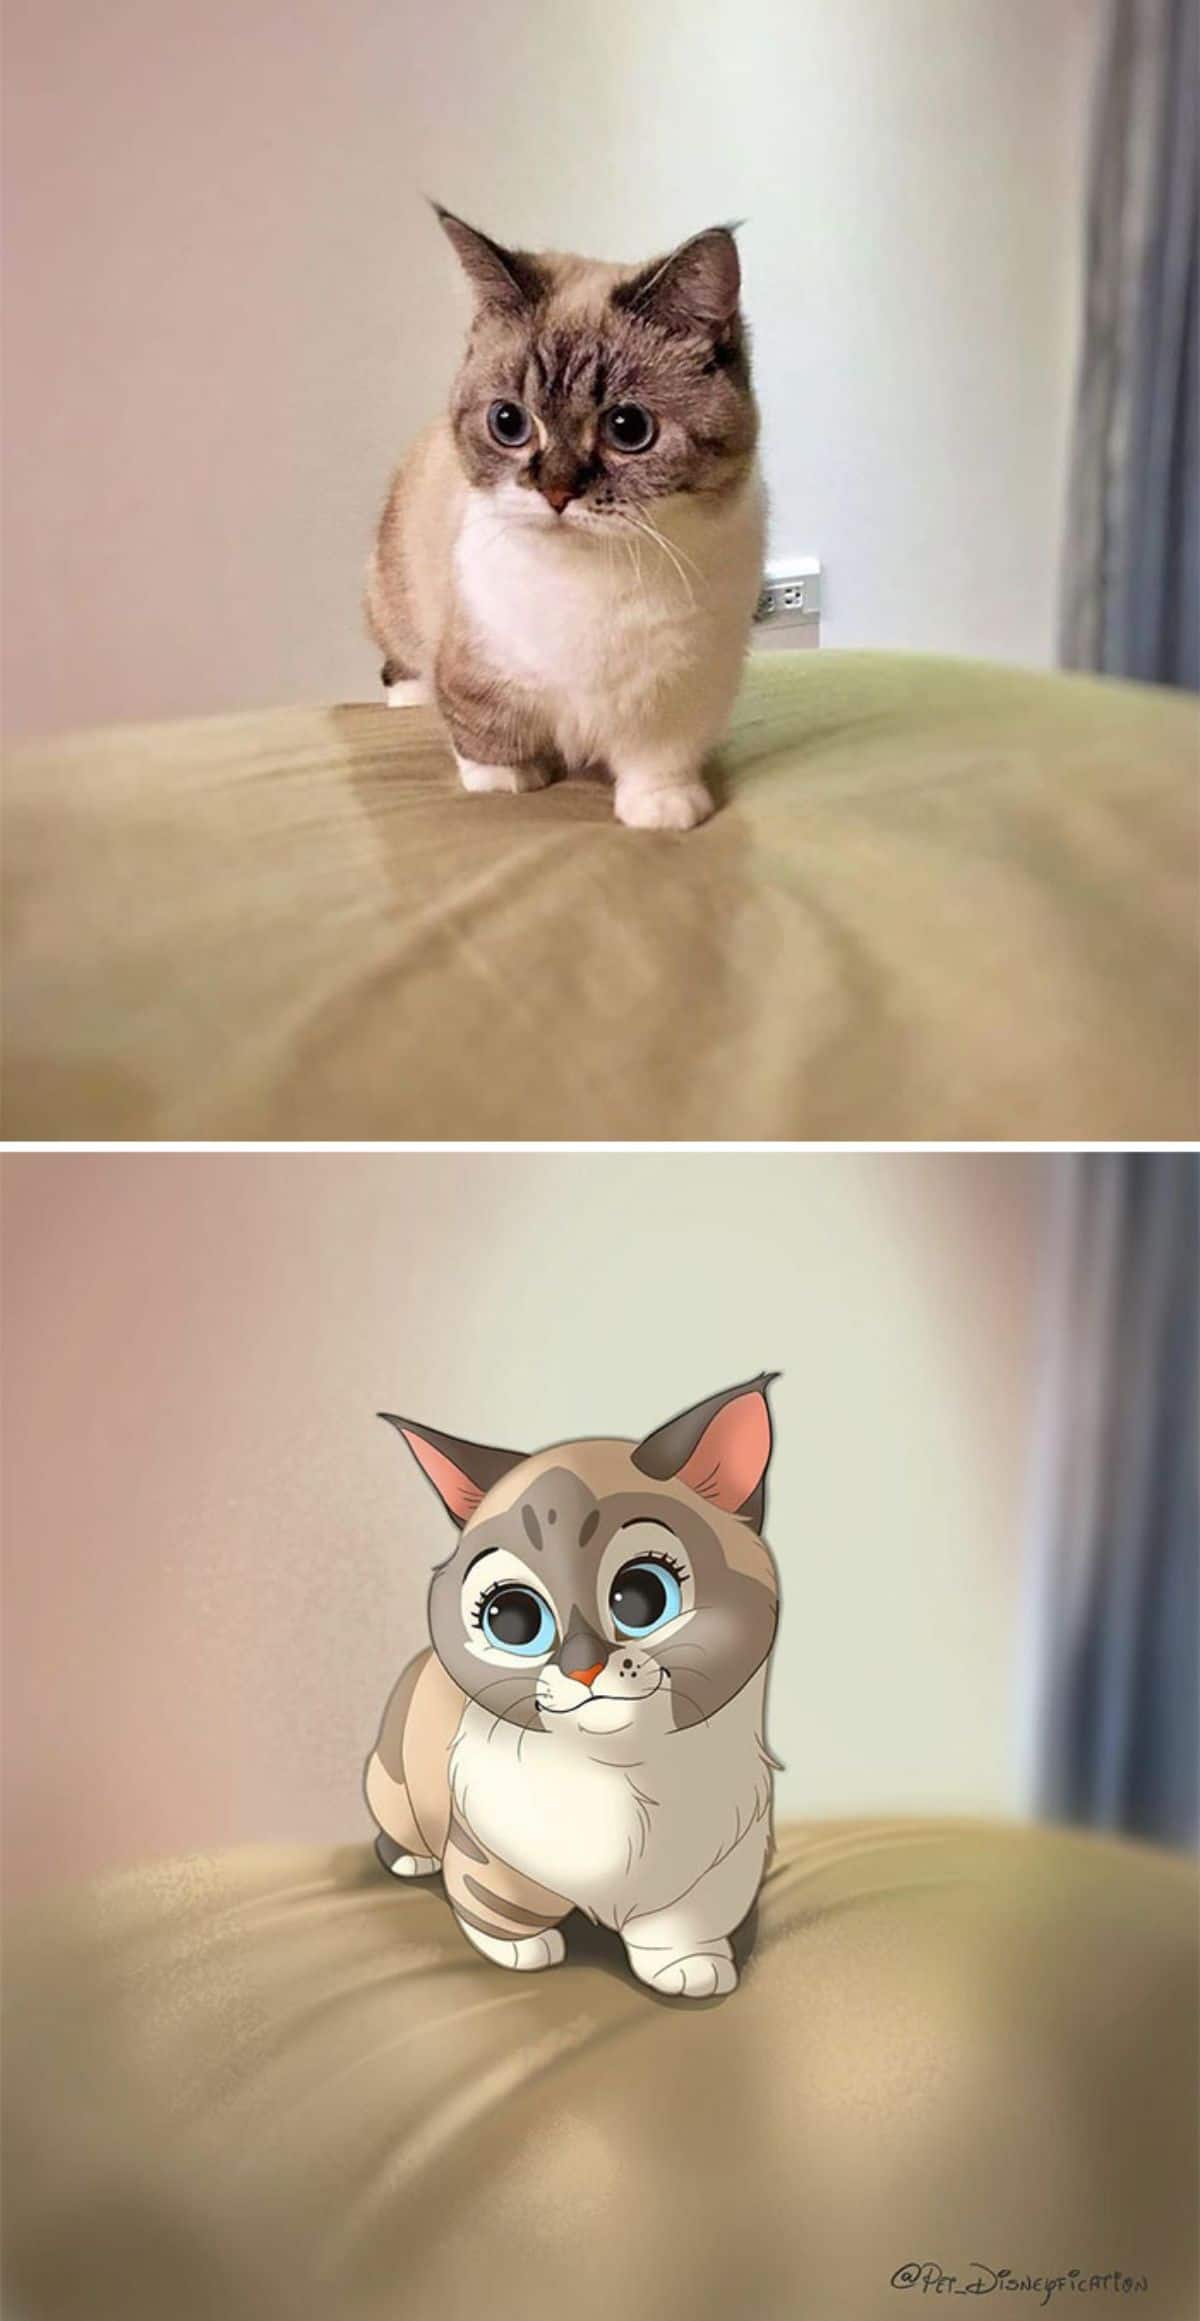 real photo and cartoon image of a brown and white cat standing on a green bed